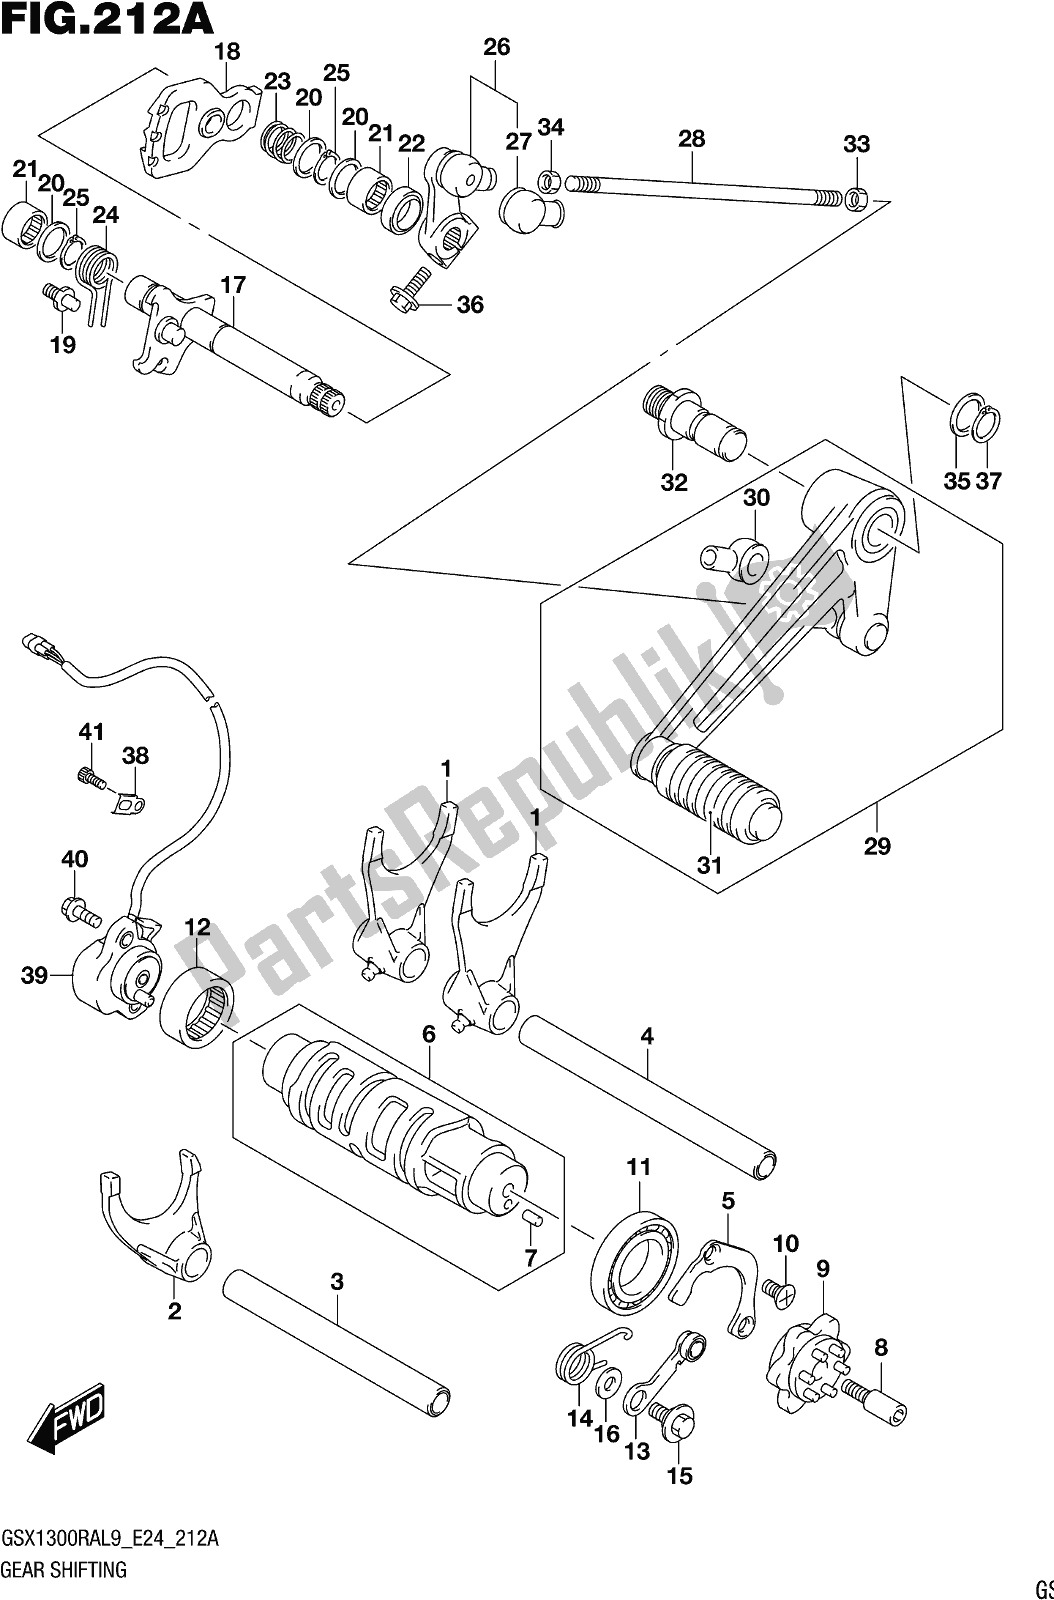 All parts for the Fig. 212a Gear Shifting of the Suzuki GSX 1300 RA 2019